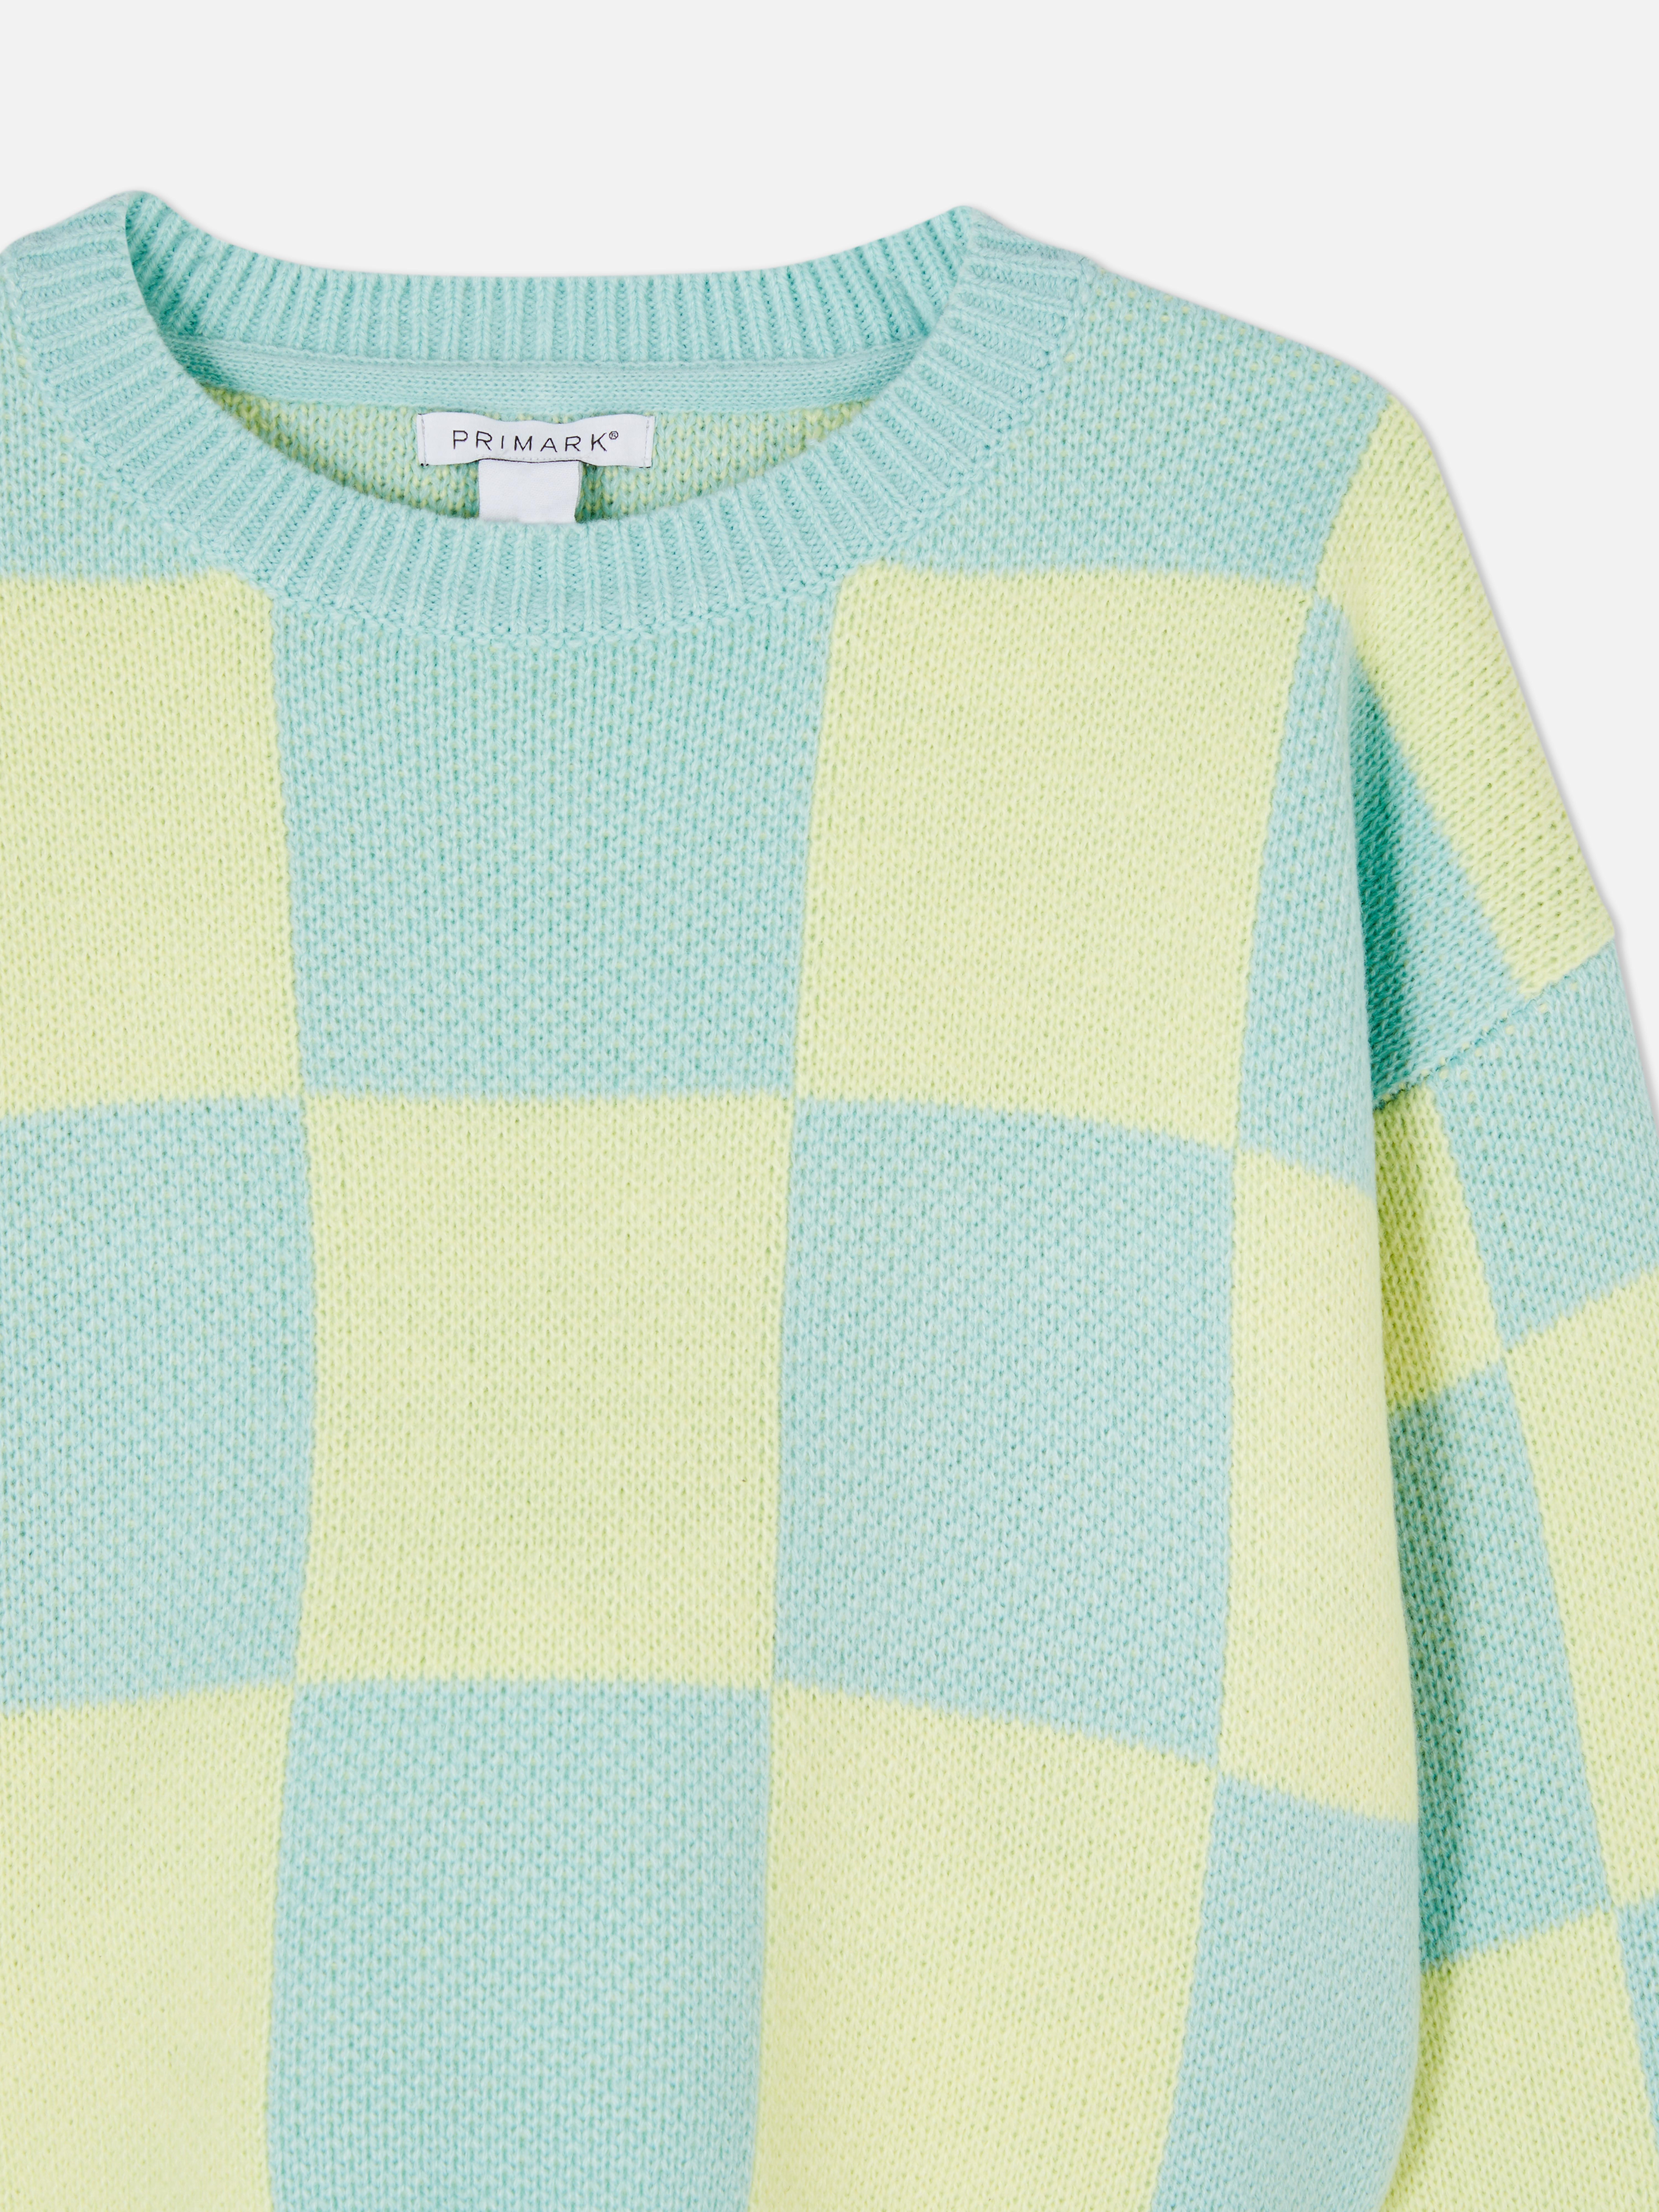 Checkerboard Cropped Jumper